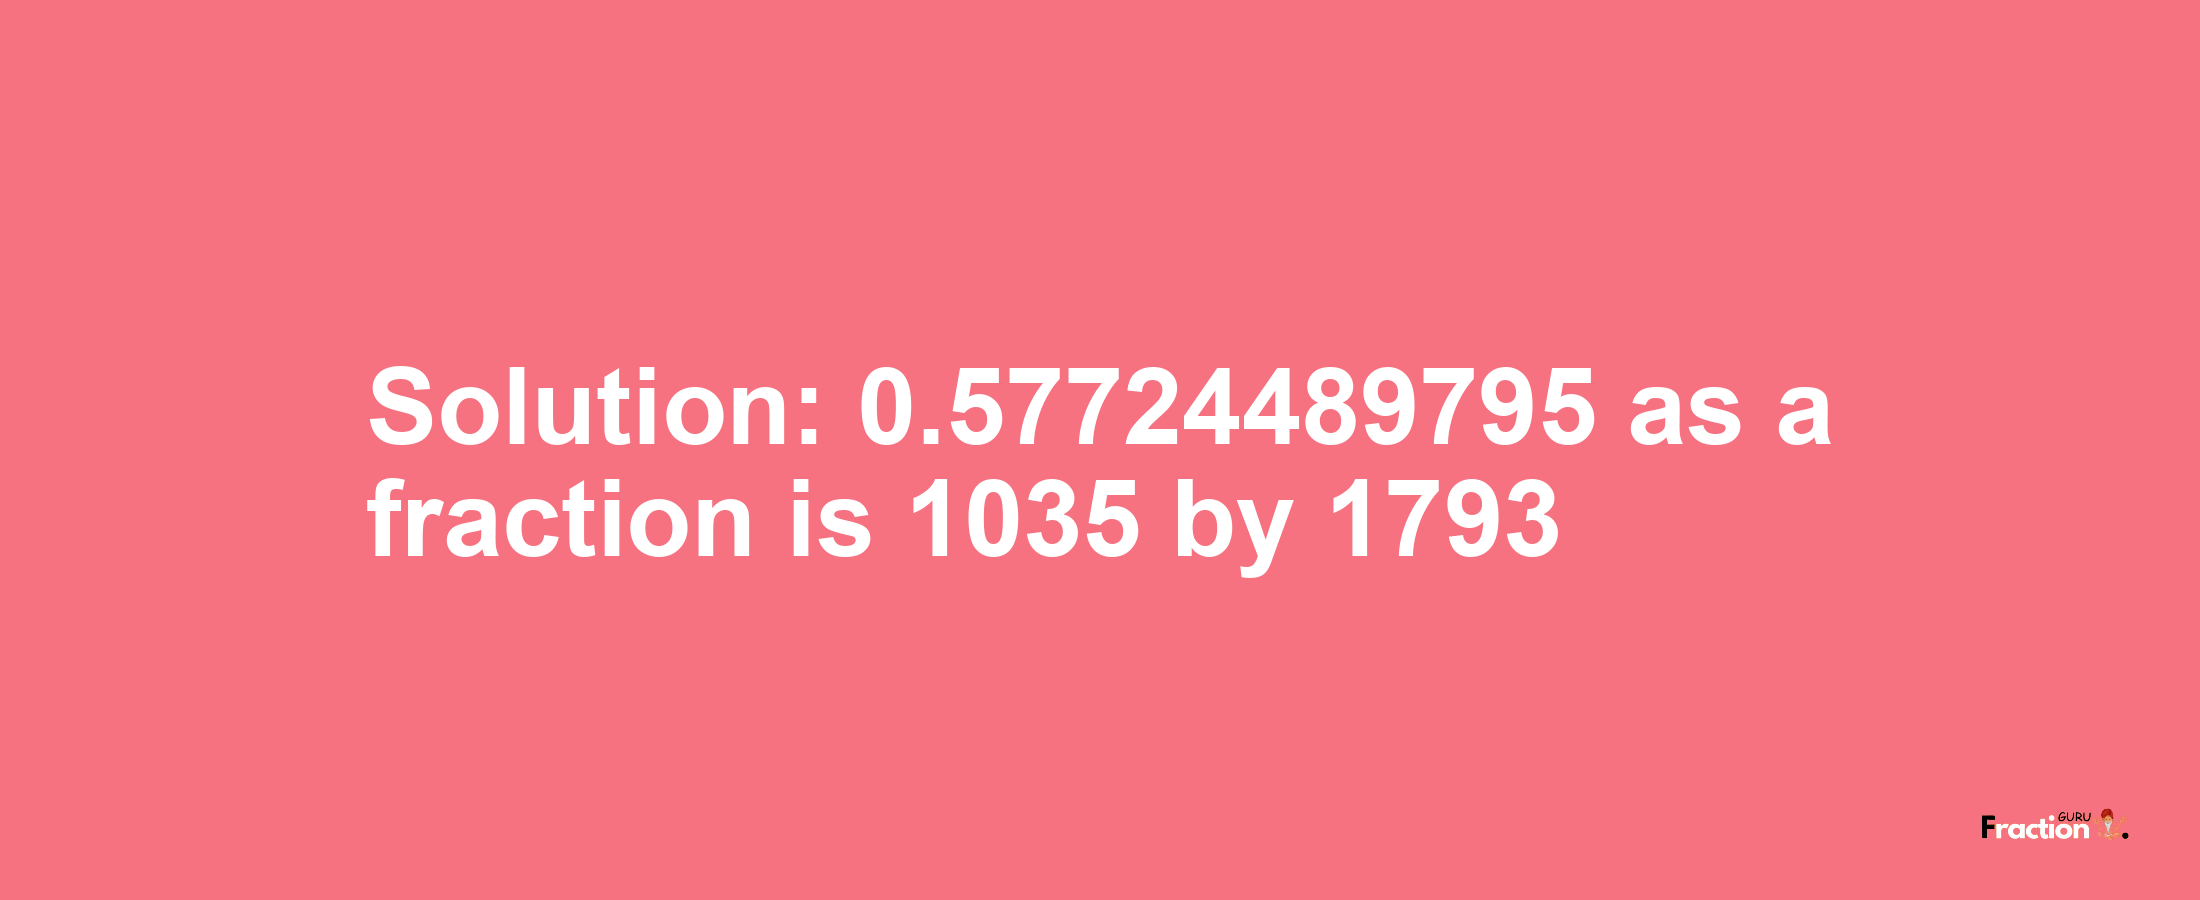 Solution:0.57724489795 as a fraction is 1035/1793